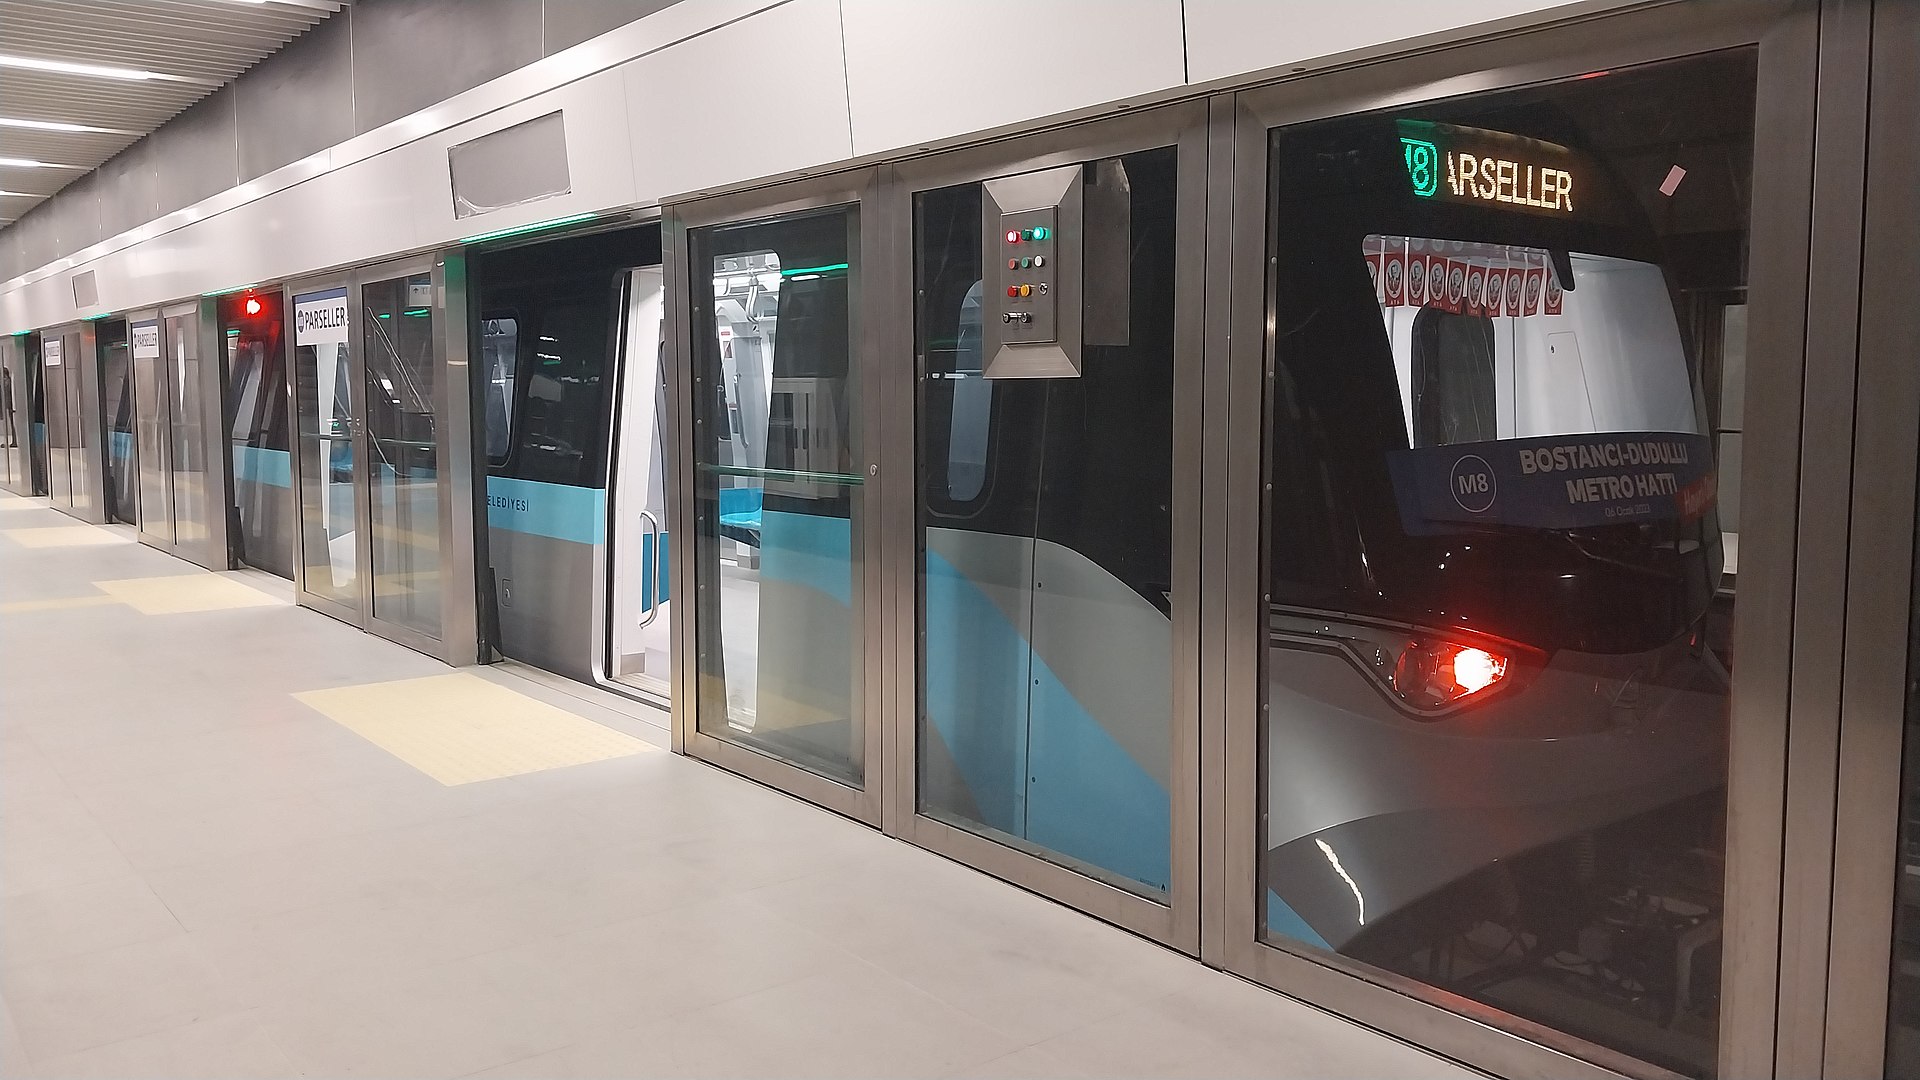 Platform screen doors at one of the stations on Line M8 of the Istanbul metro